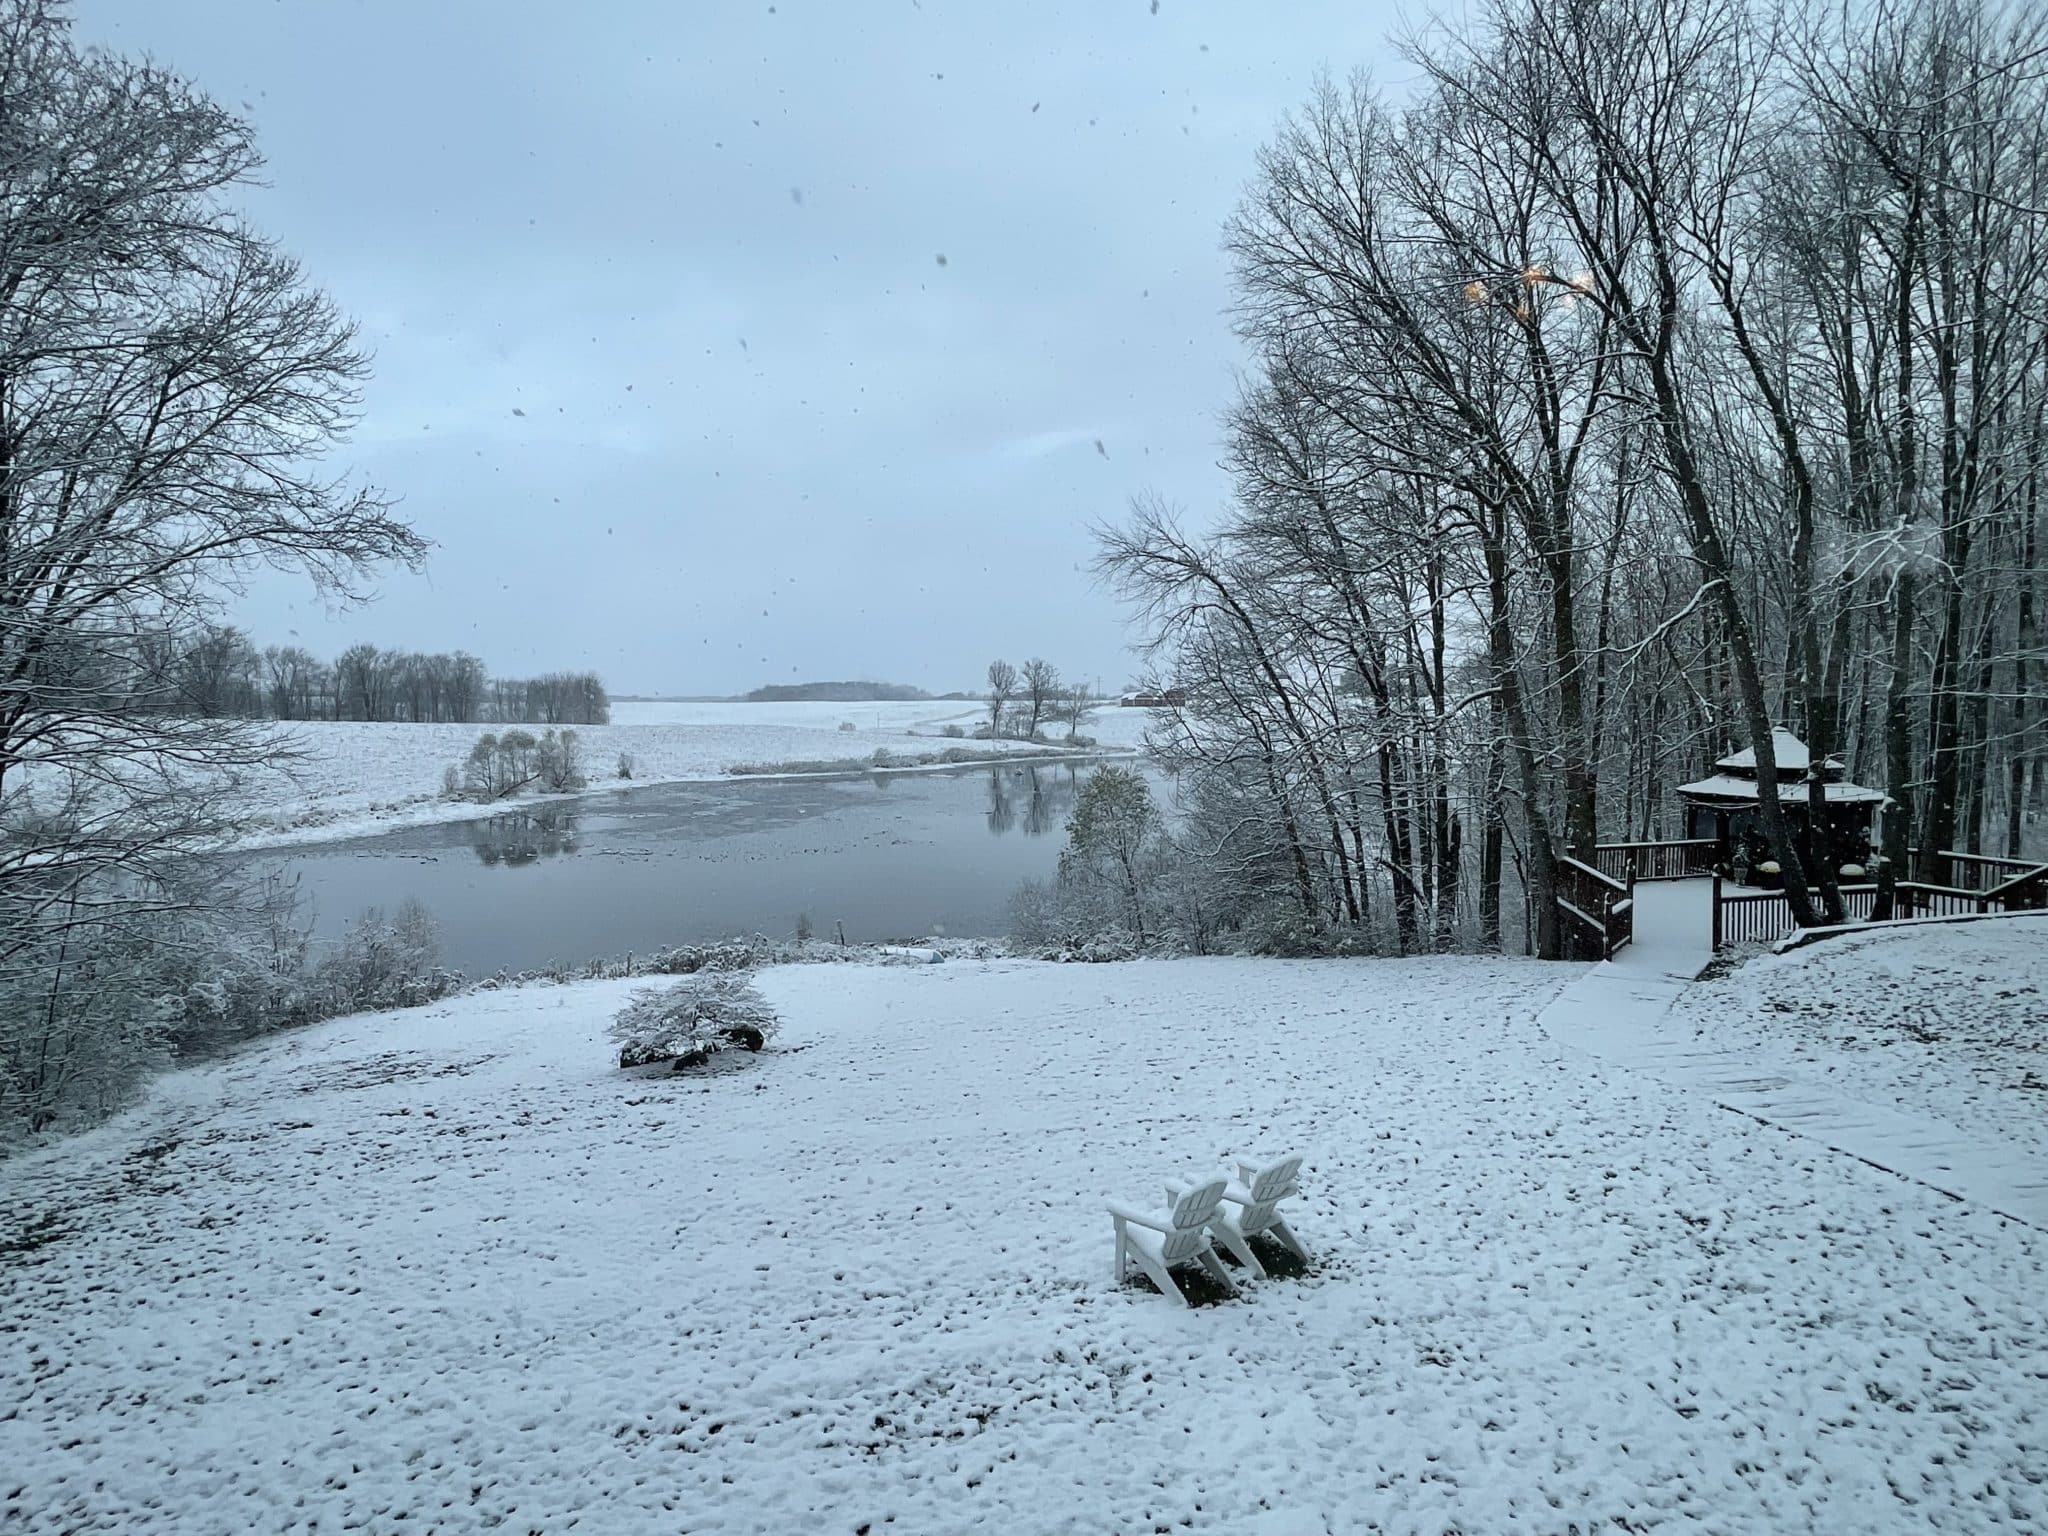 Looking out over the pond after first snowfall